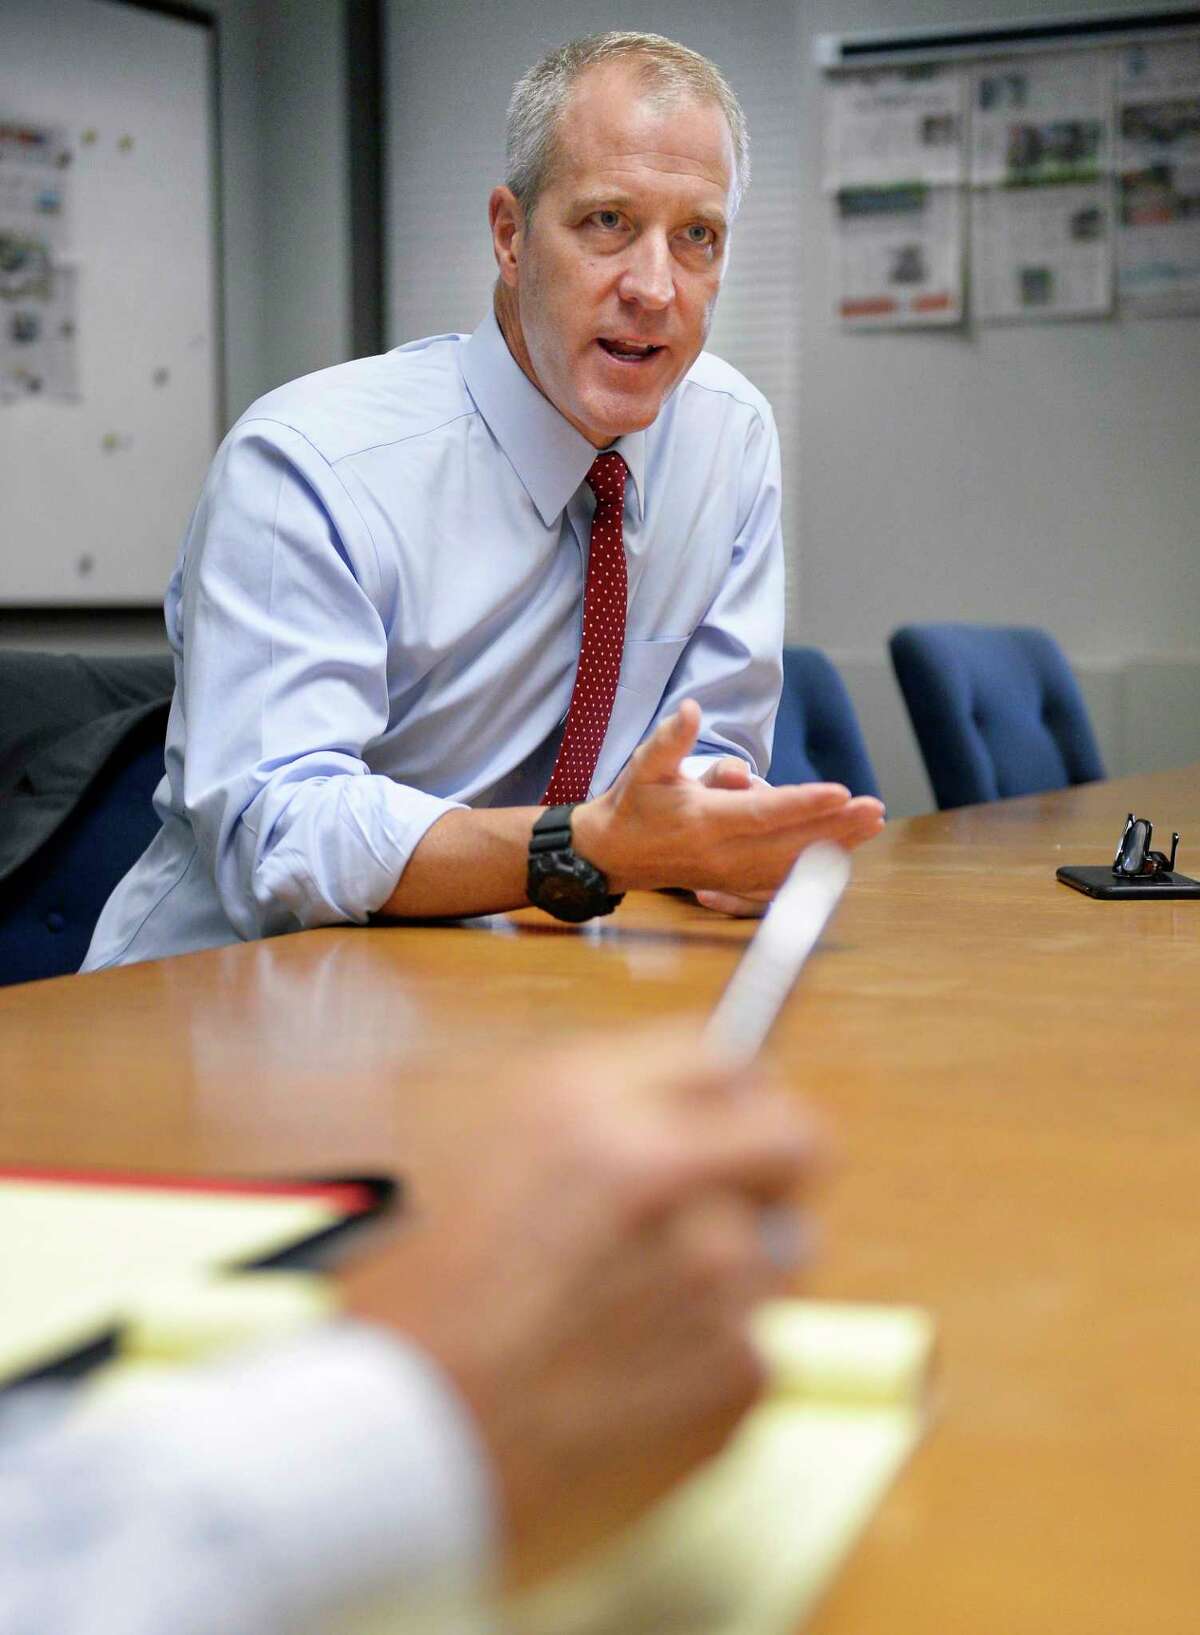 Democratic candidate for New York attorney general, U.S. Rep. Sean Patrick Maloney meets with the Times Union editorial board Thursday August 16, 2018 in Colonie, NY. (John Carl D'Annibale/Times Union)